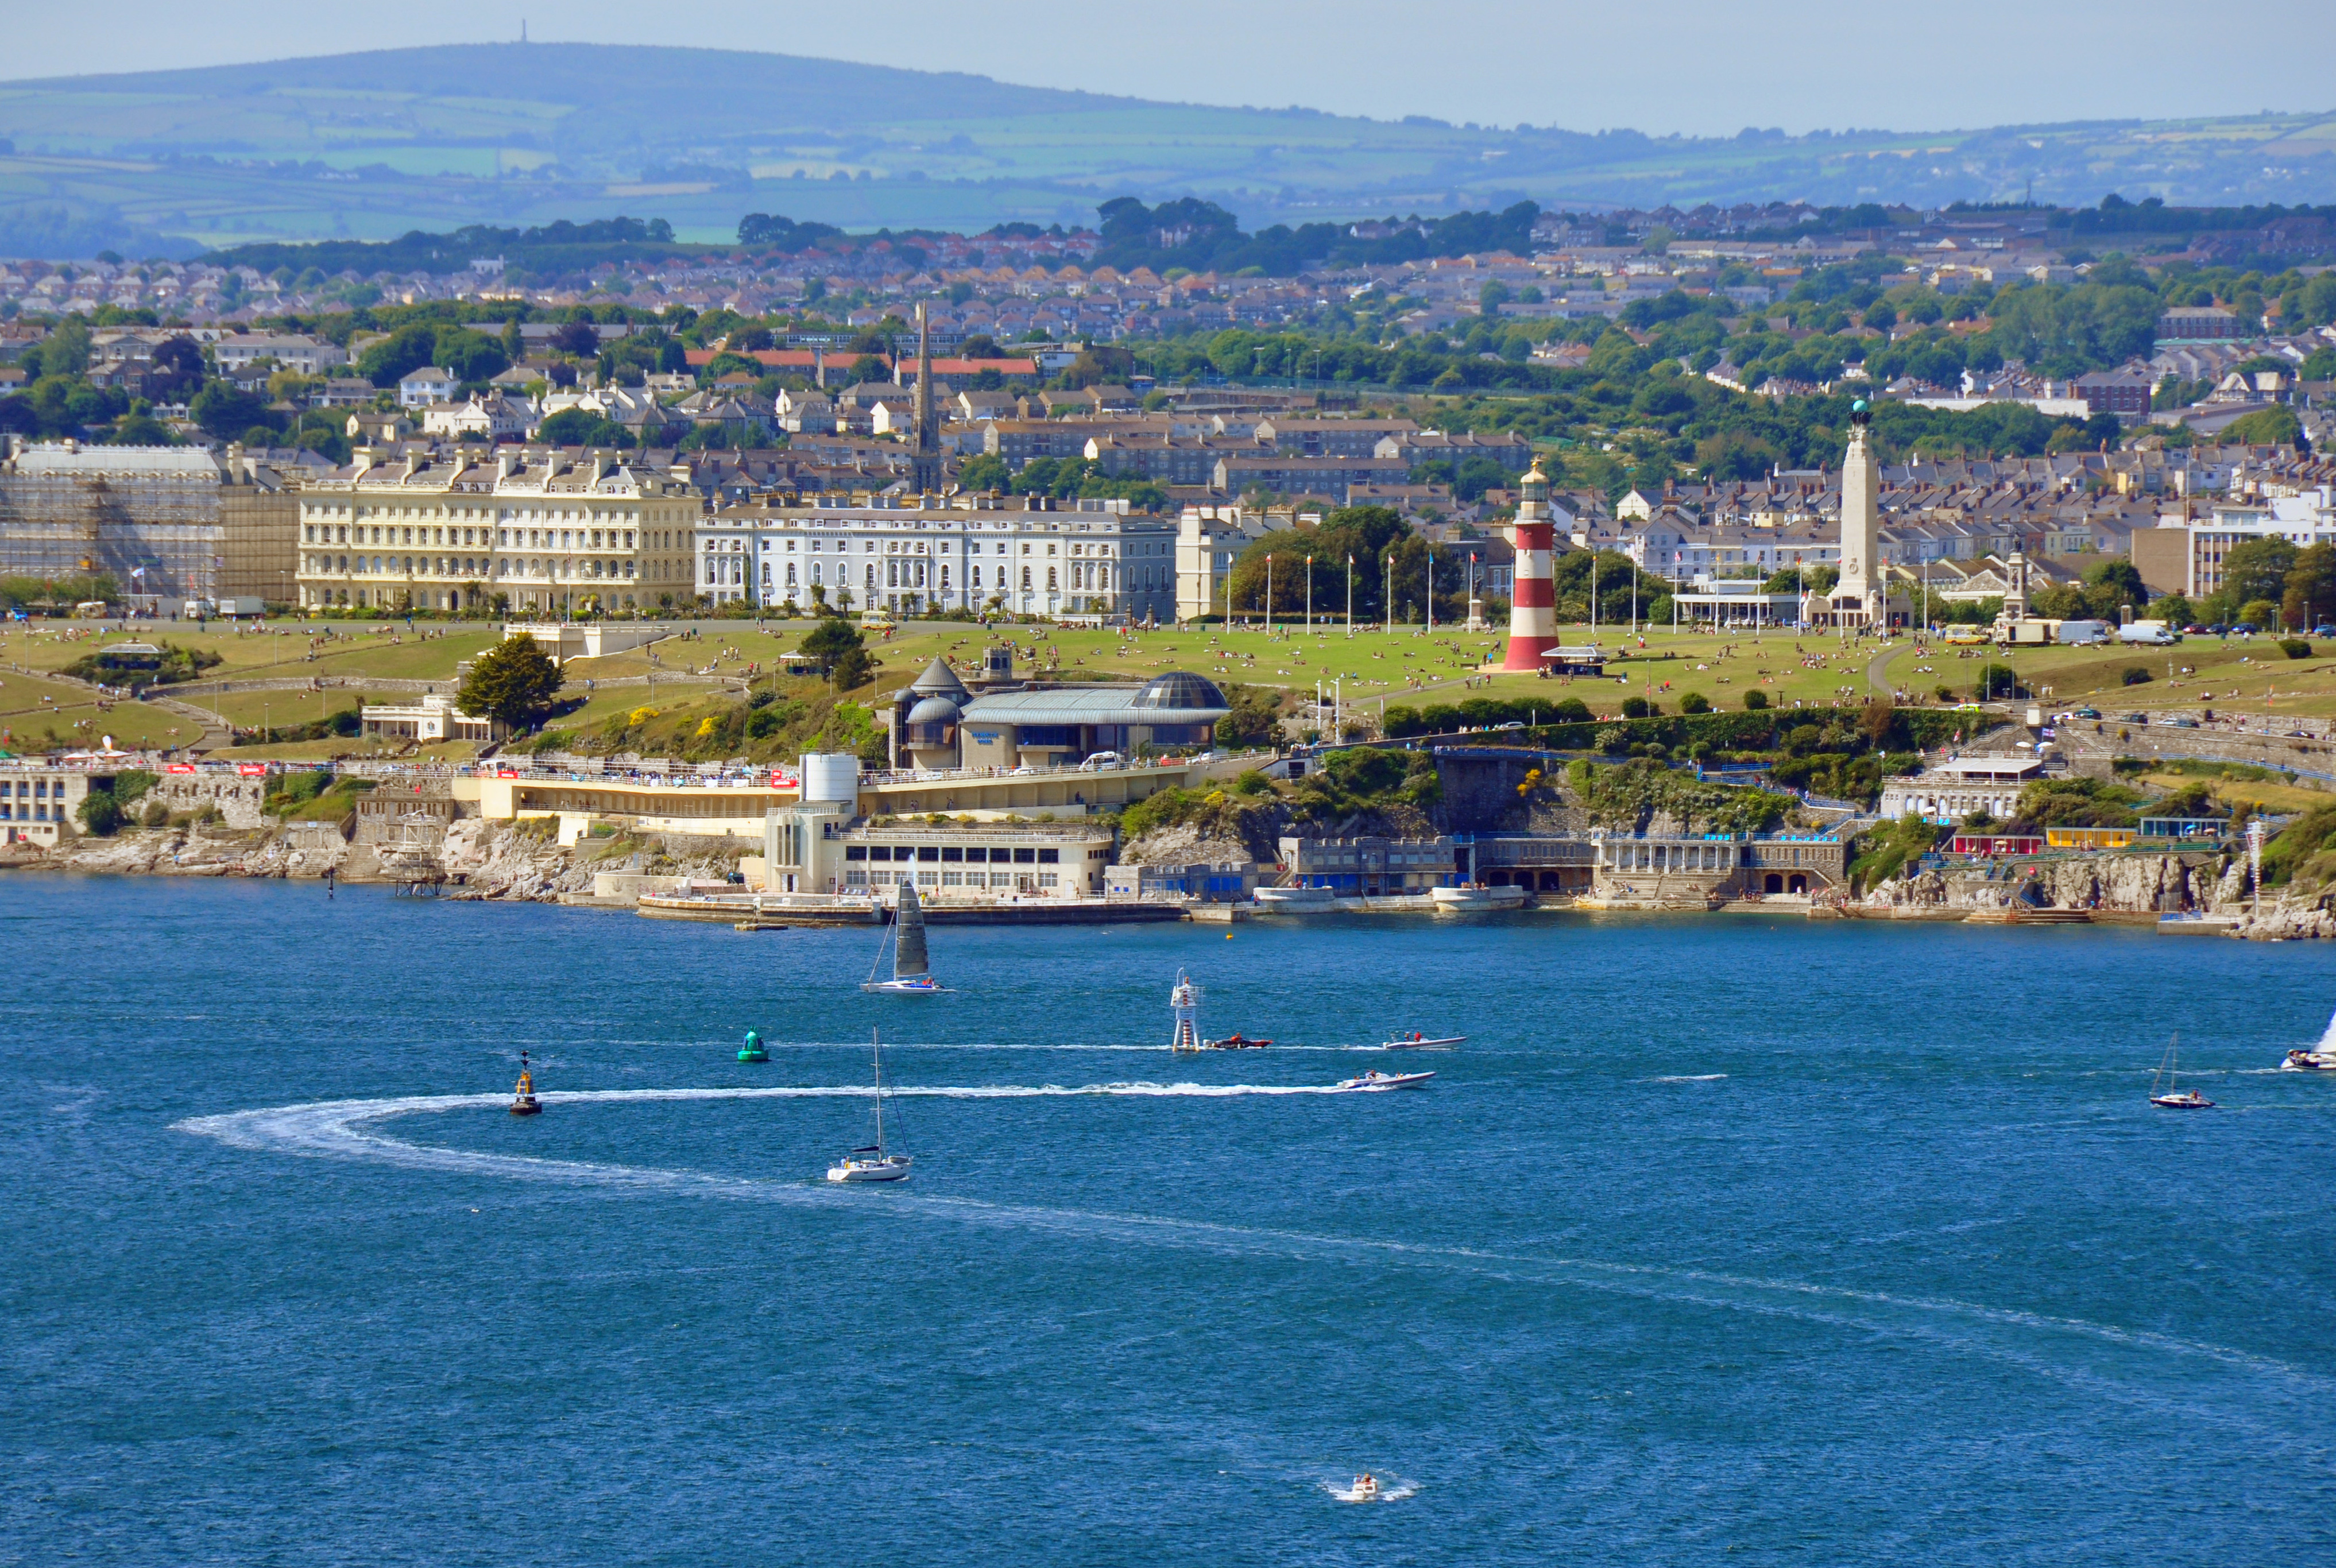 File:Plymouth Hoe from Staddon Heights.jpg - Wikimedia Commons